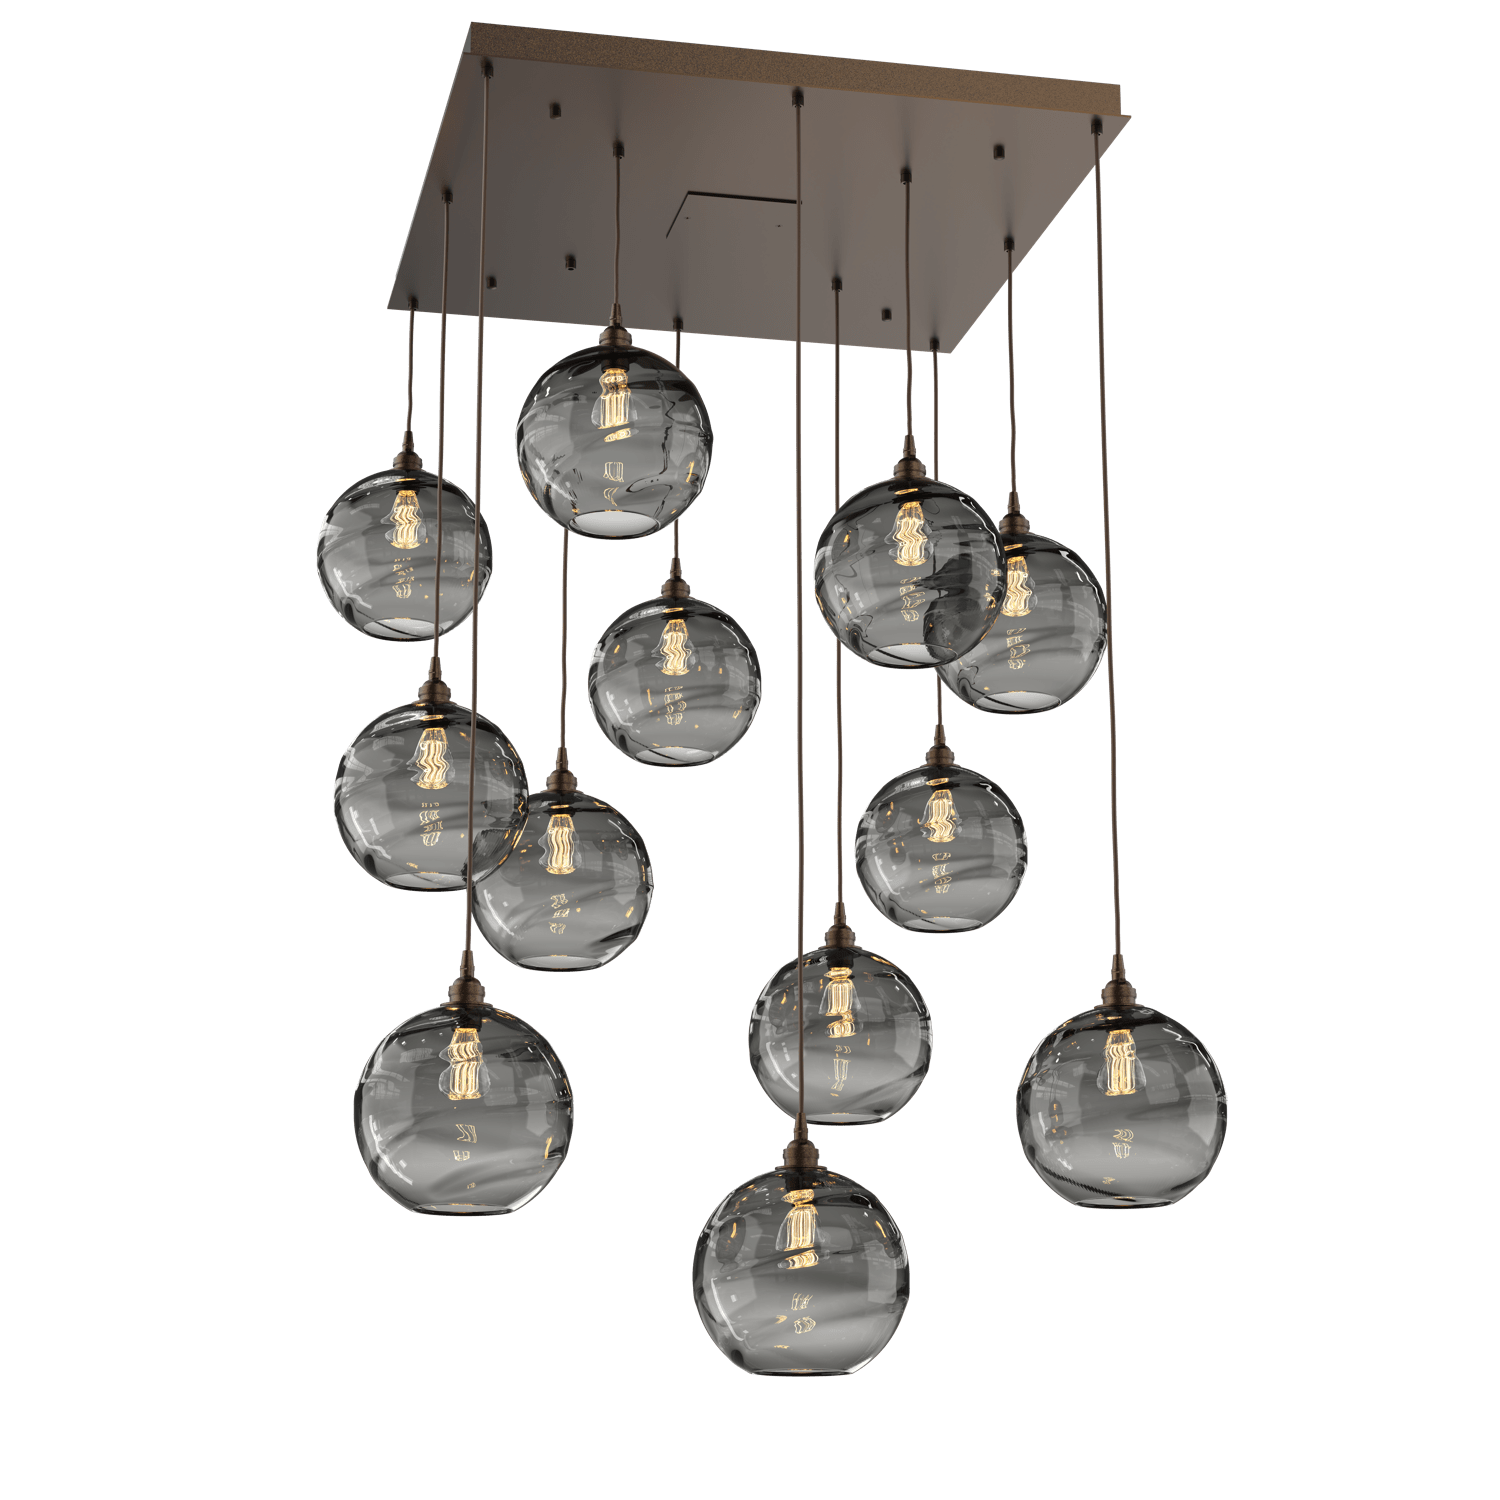 CHB0047-12-FB-OS-Hammerton-Studio-Optic-Blown-Glass-Terra-12-light-square-pendant-chandelier-with-flat-bronze-finish-and-optic-smoke-blown-glass-shades-and-incandescent-lamping